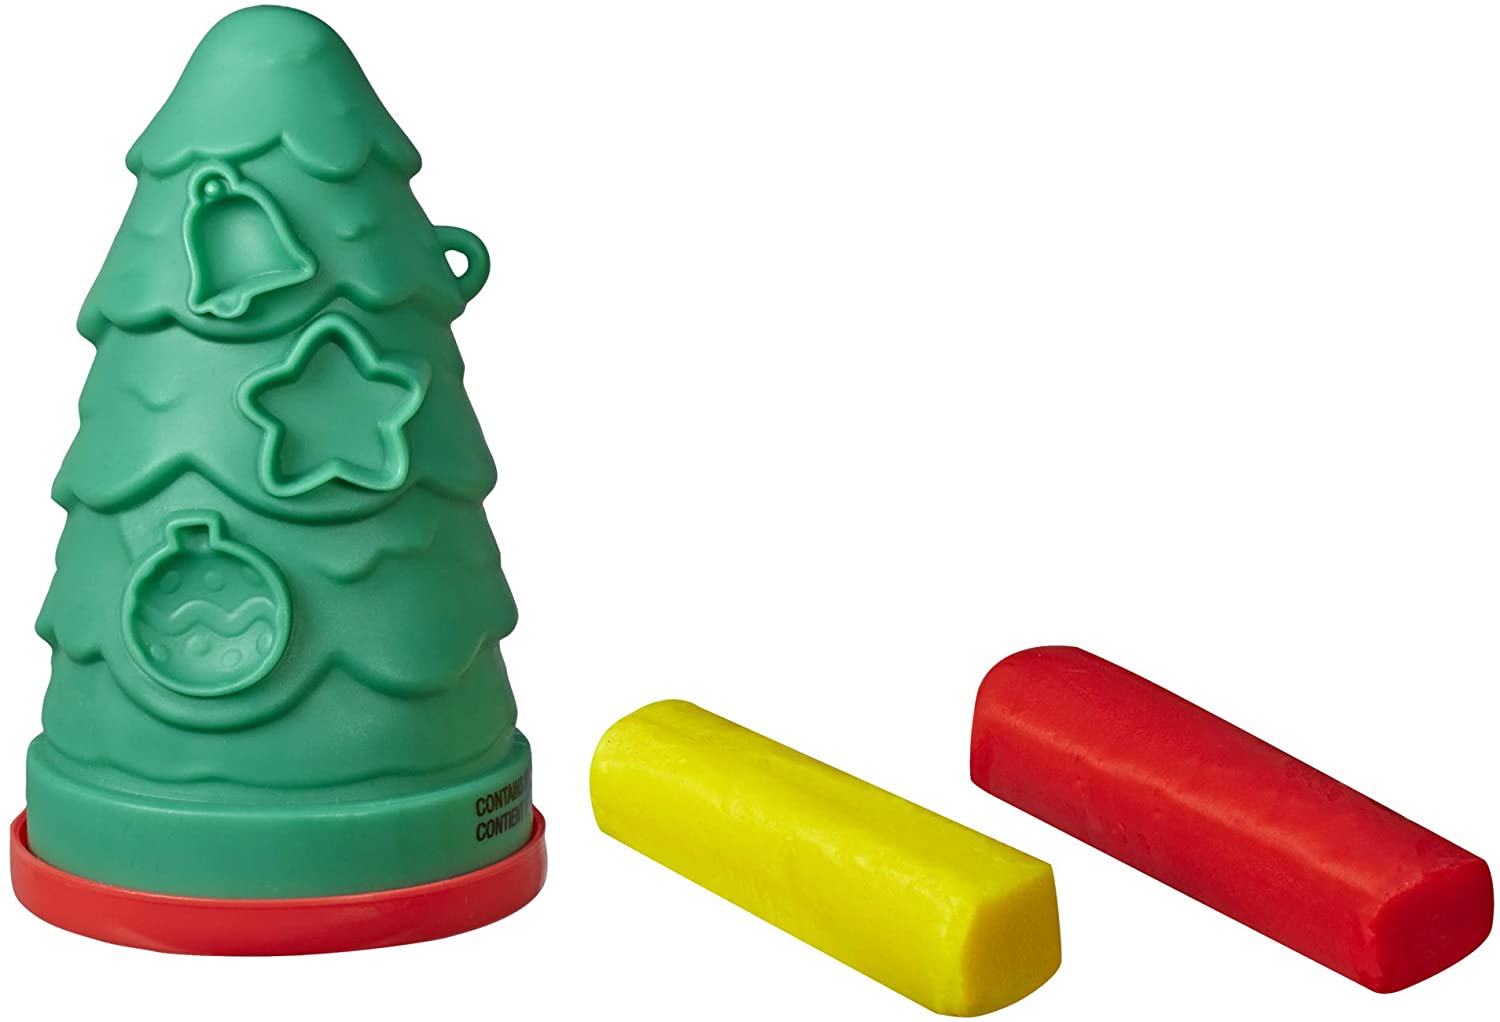 Play-Doh Holiday Toy Ornament